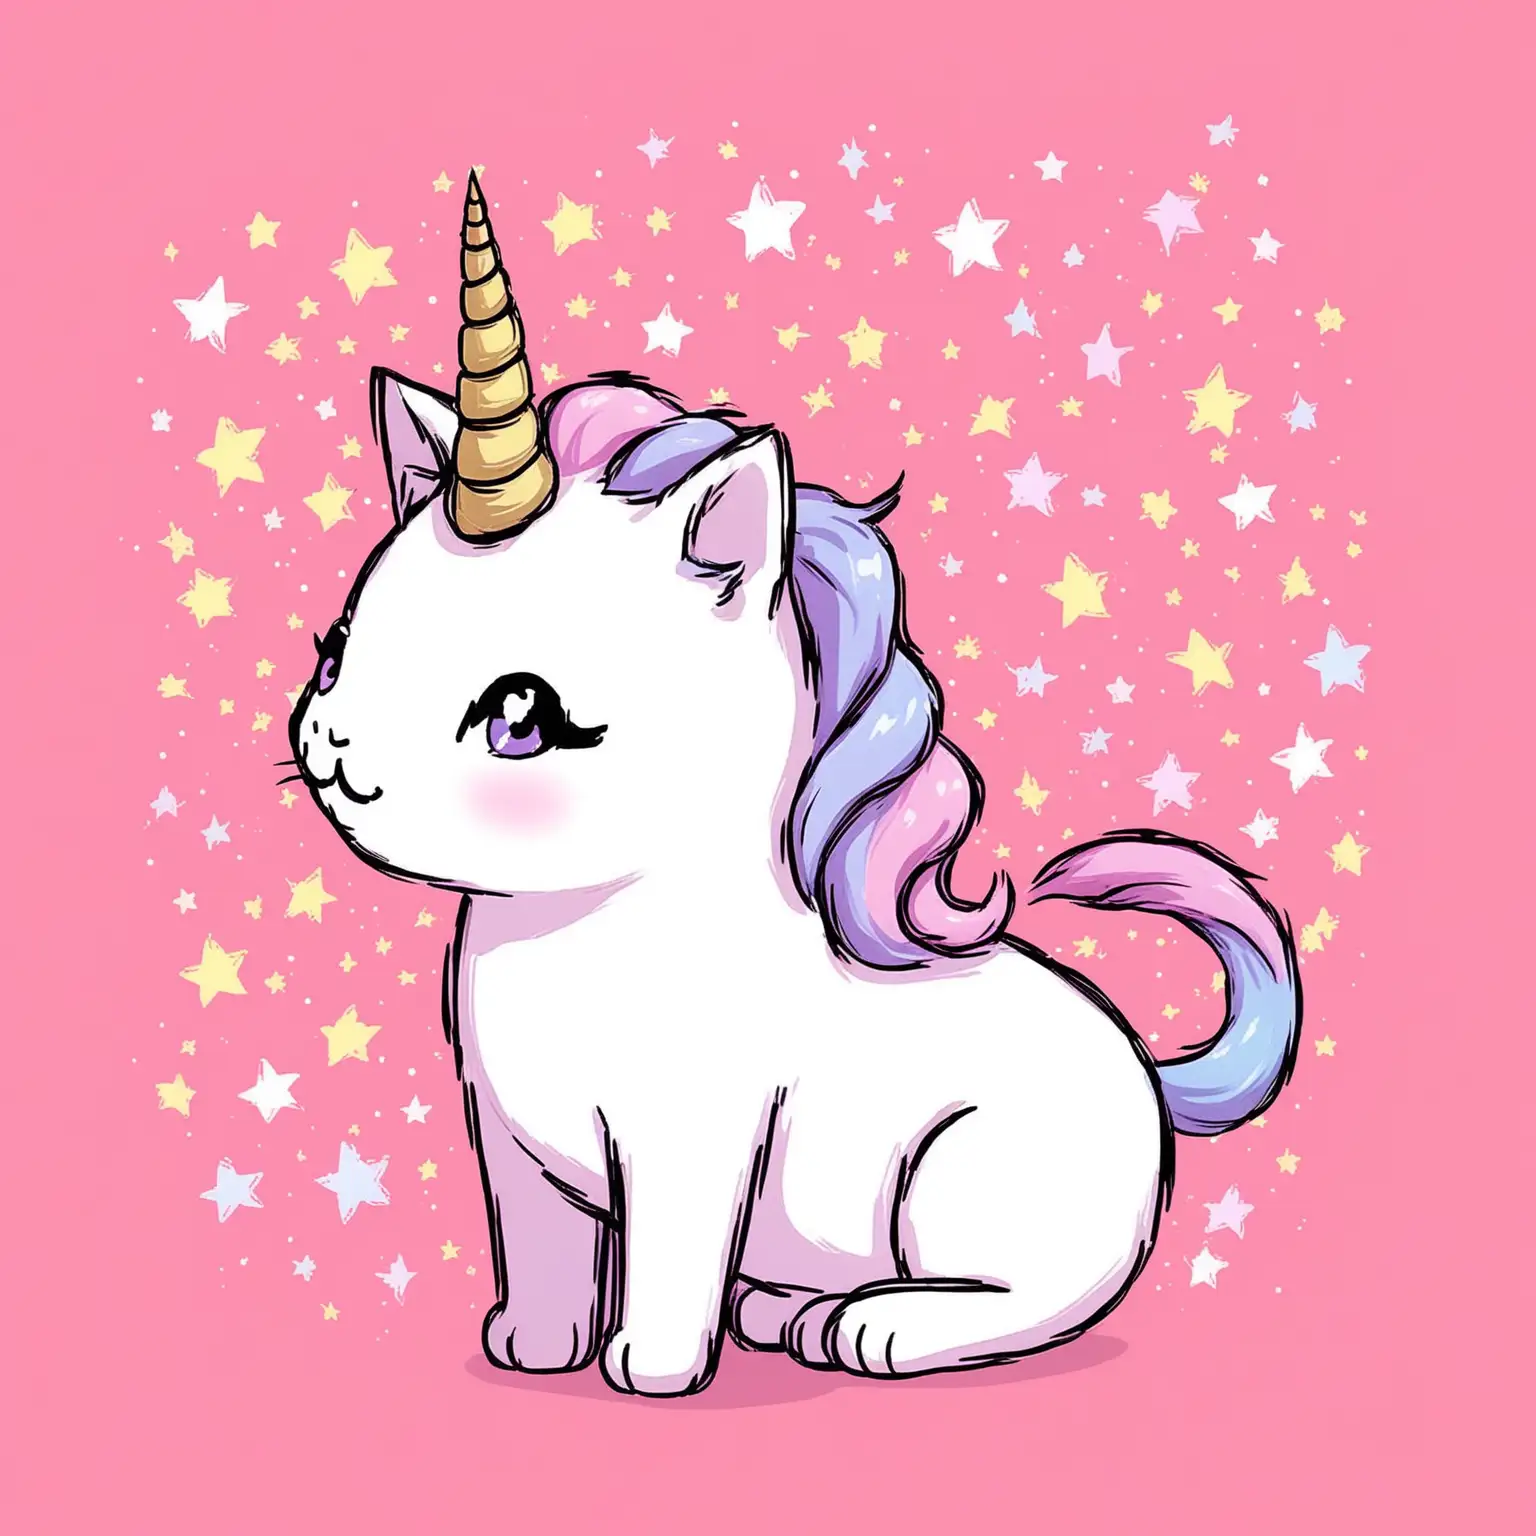 Magical Unicorn Cat on Pink Starry Background